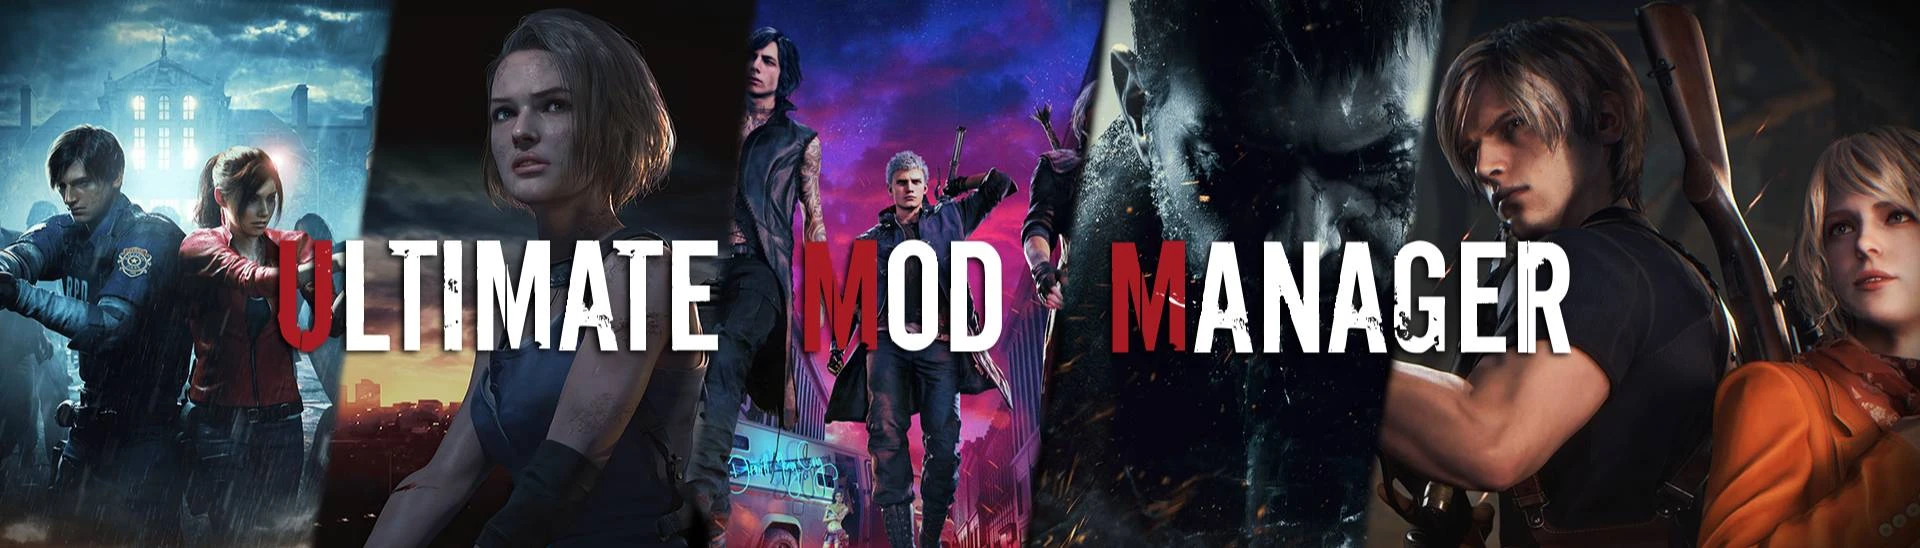 Steam Community :: Video :: How to Install Mods for RE2 and DMC5 - Fluffy  Manager Guide